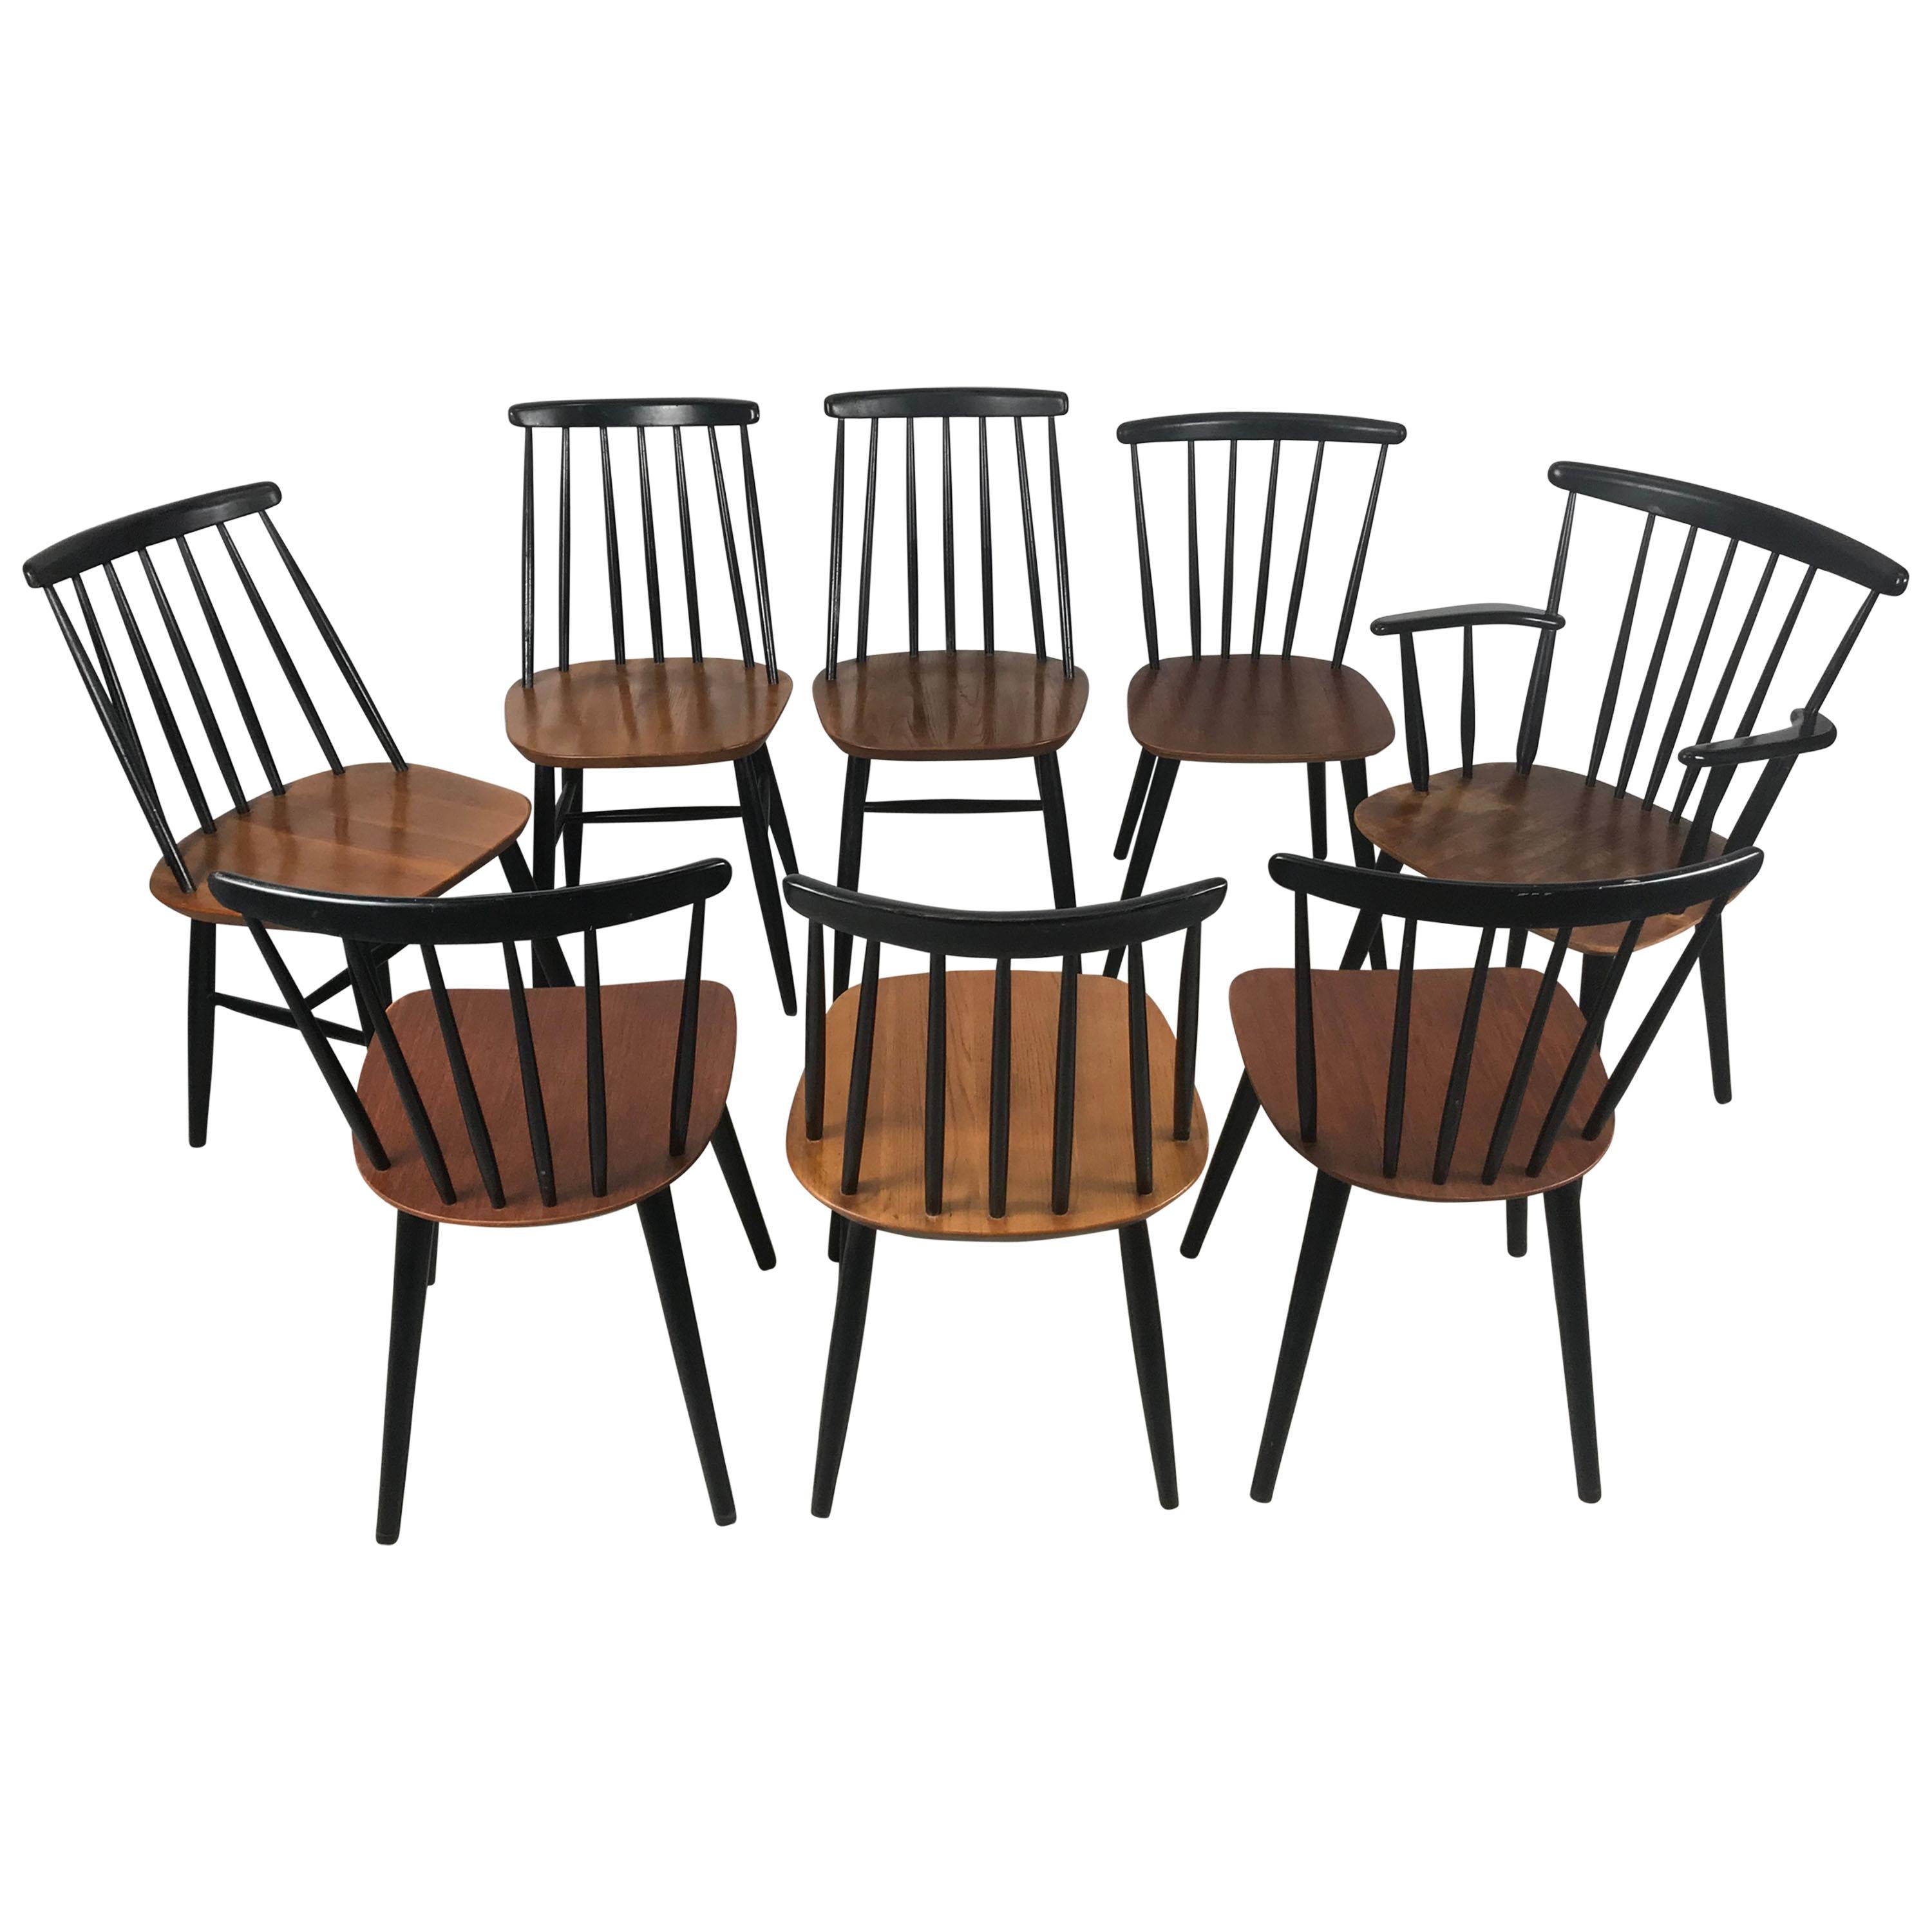 Set of Eight Stick Back Scandinavian Dining Chairs by Thomas Harlev for Farstrup